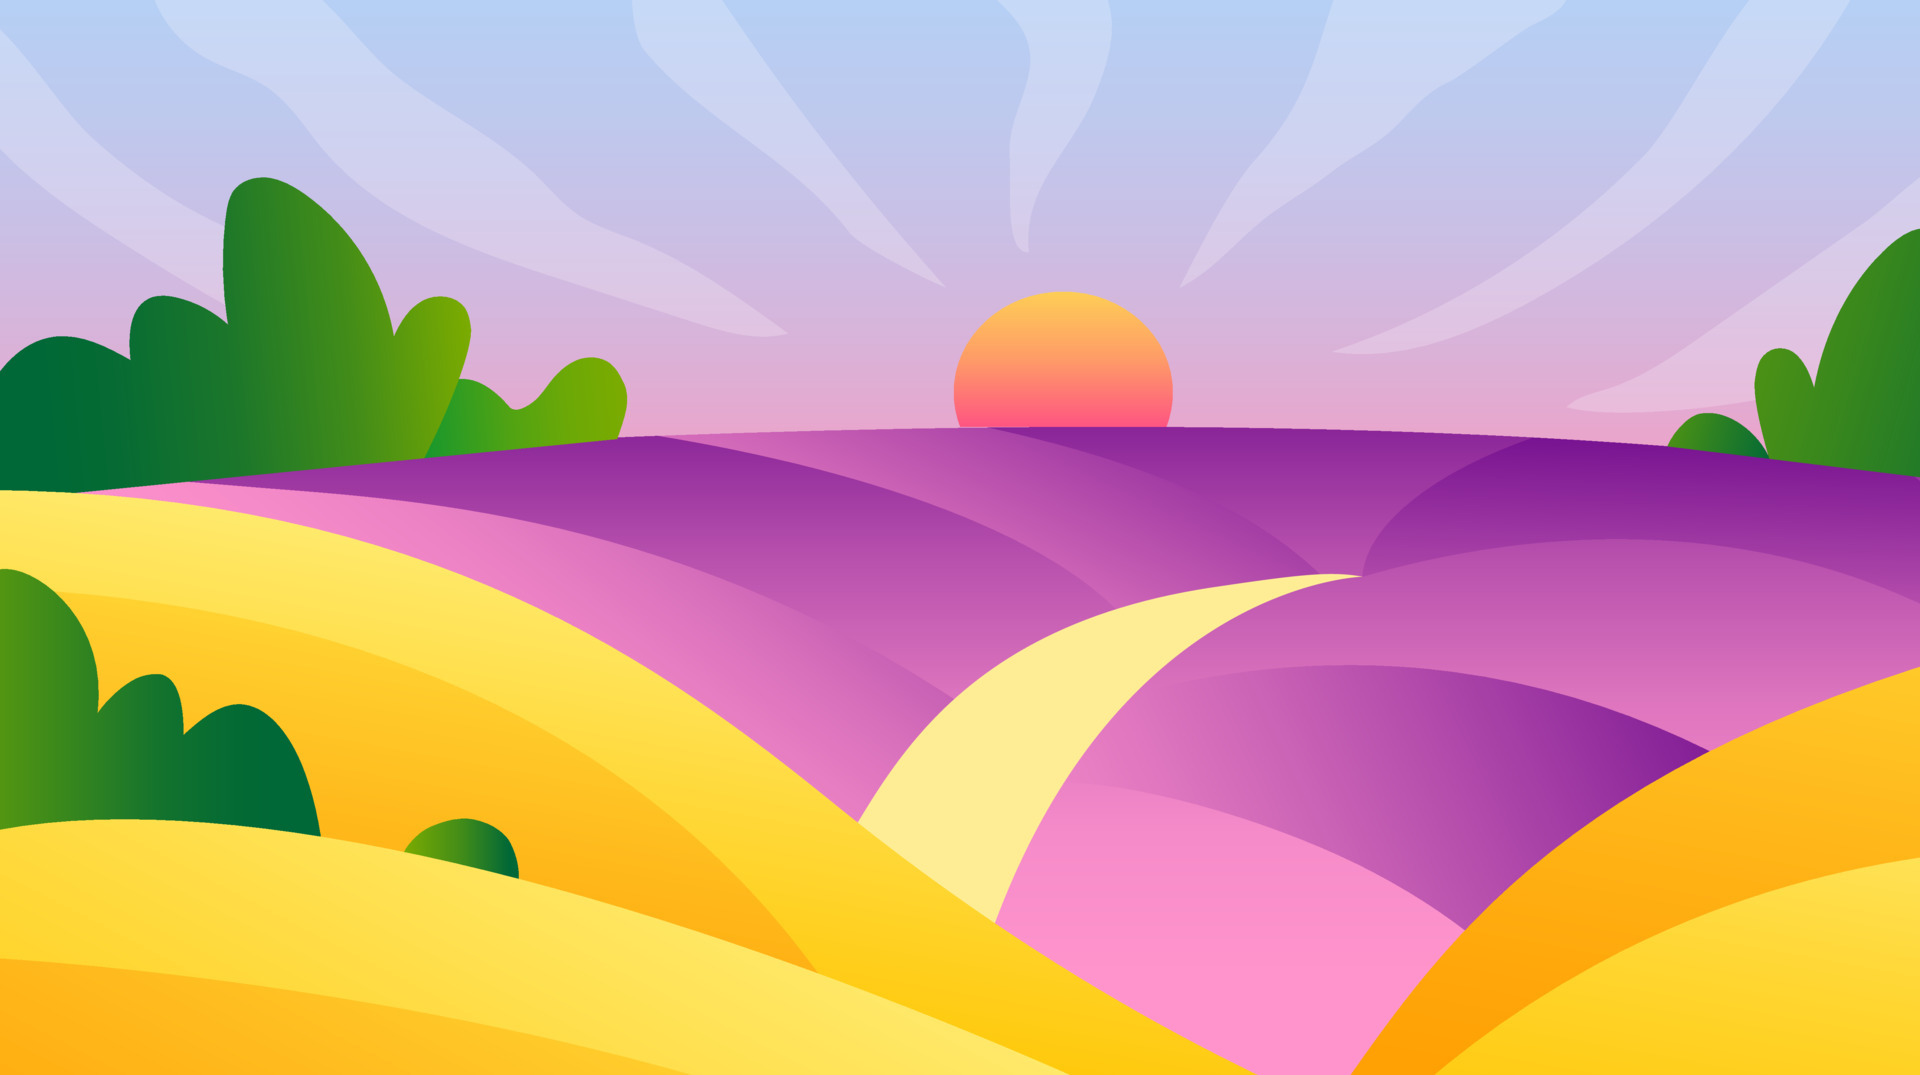 Rural landscape vector illustration. Farm agriculture colorful concept. Horizon view of wheat hills valley. Sunny day summer weather. Sunset meadow outdoor wallpaper. Countryside lavender field scene